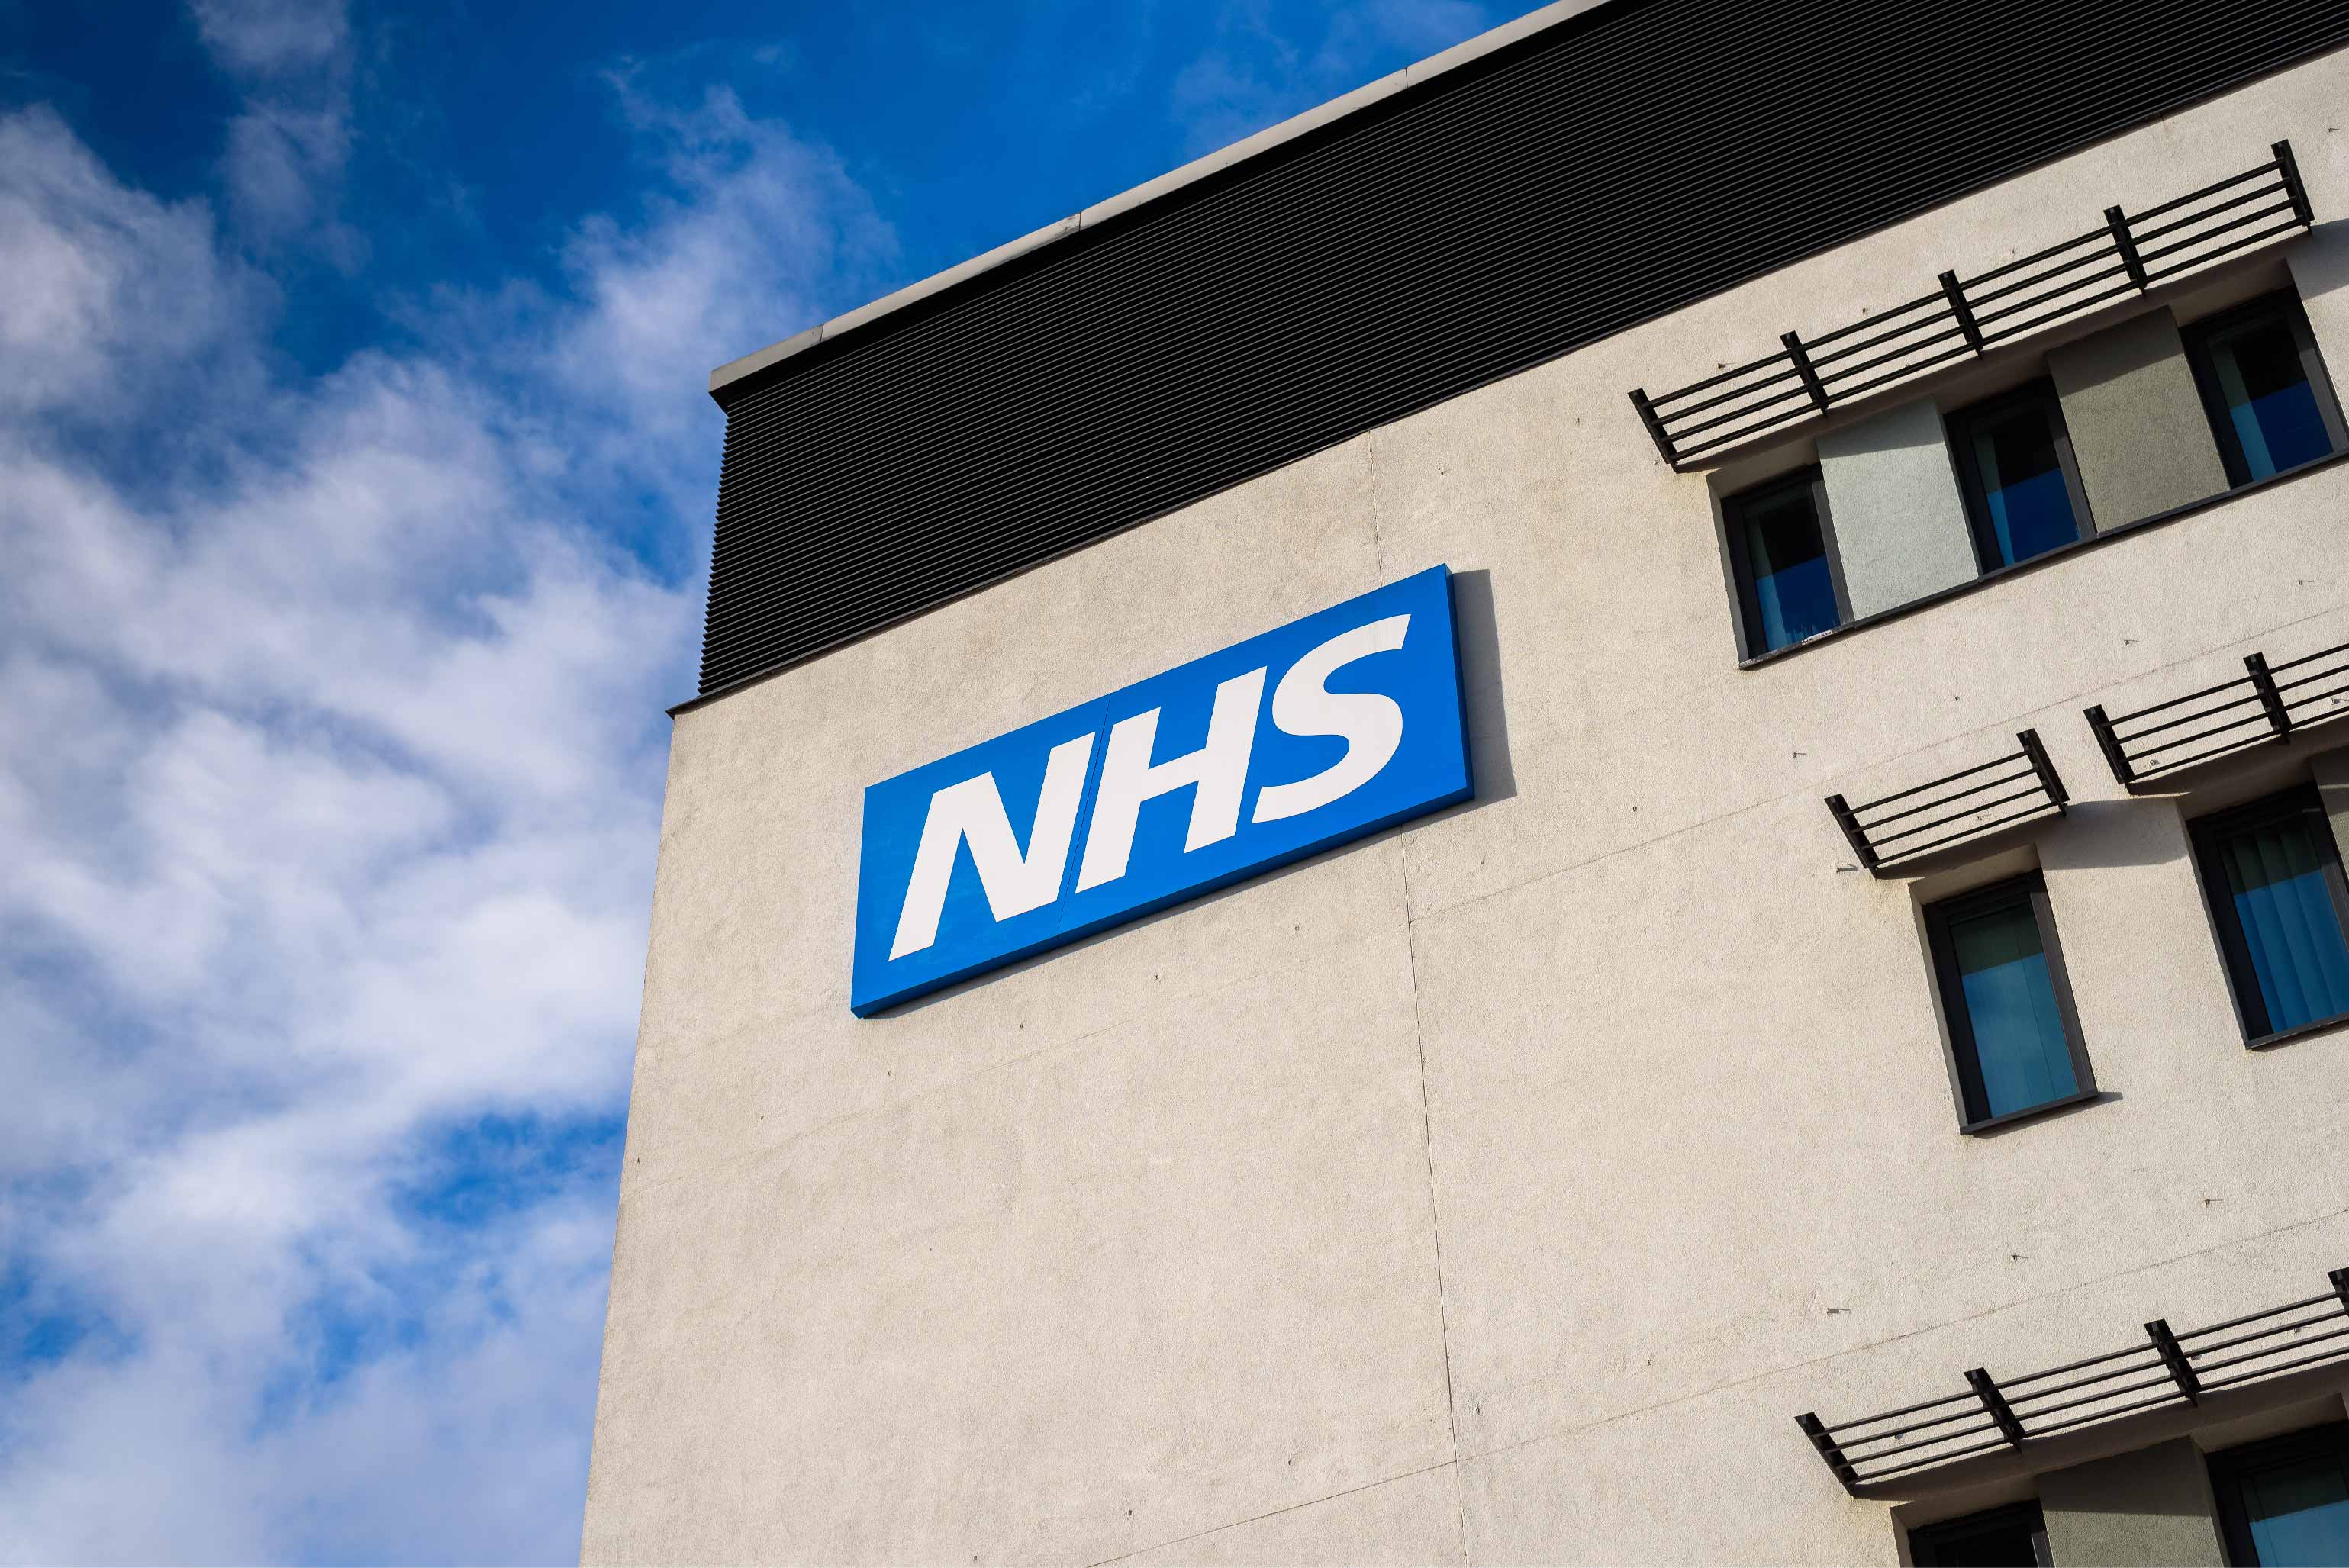 Whistleblowers in the NHS who expose the truth